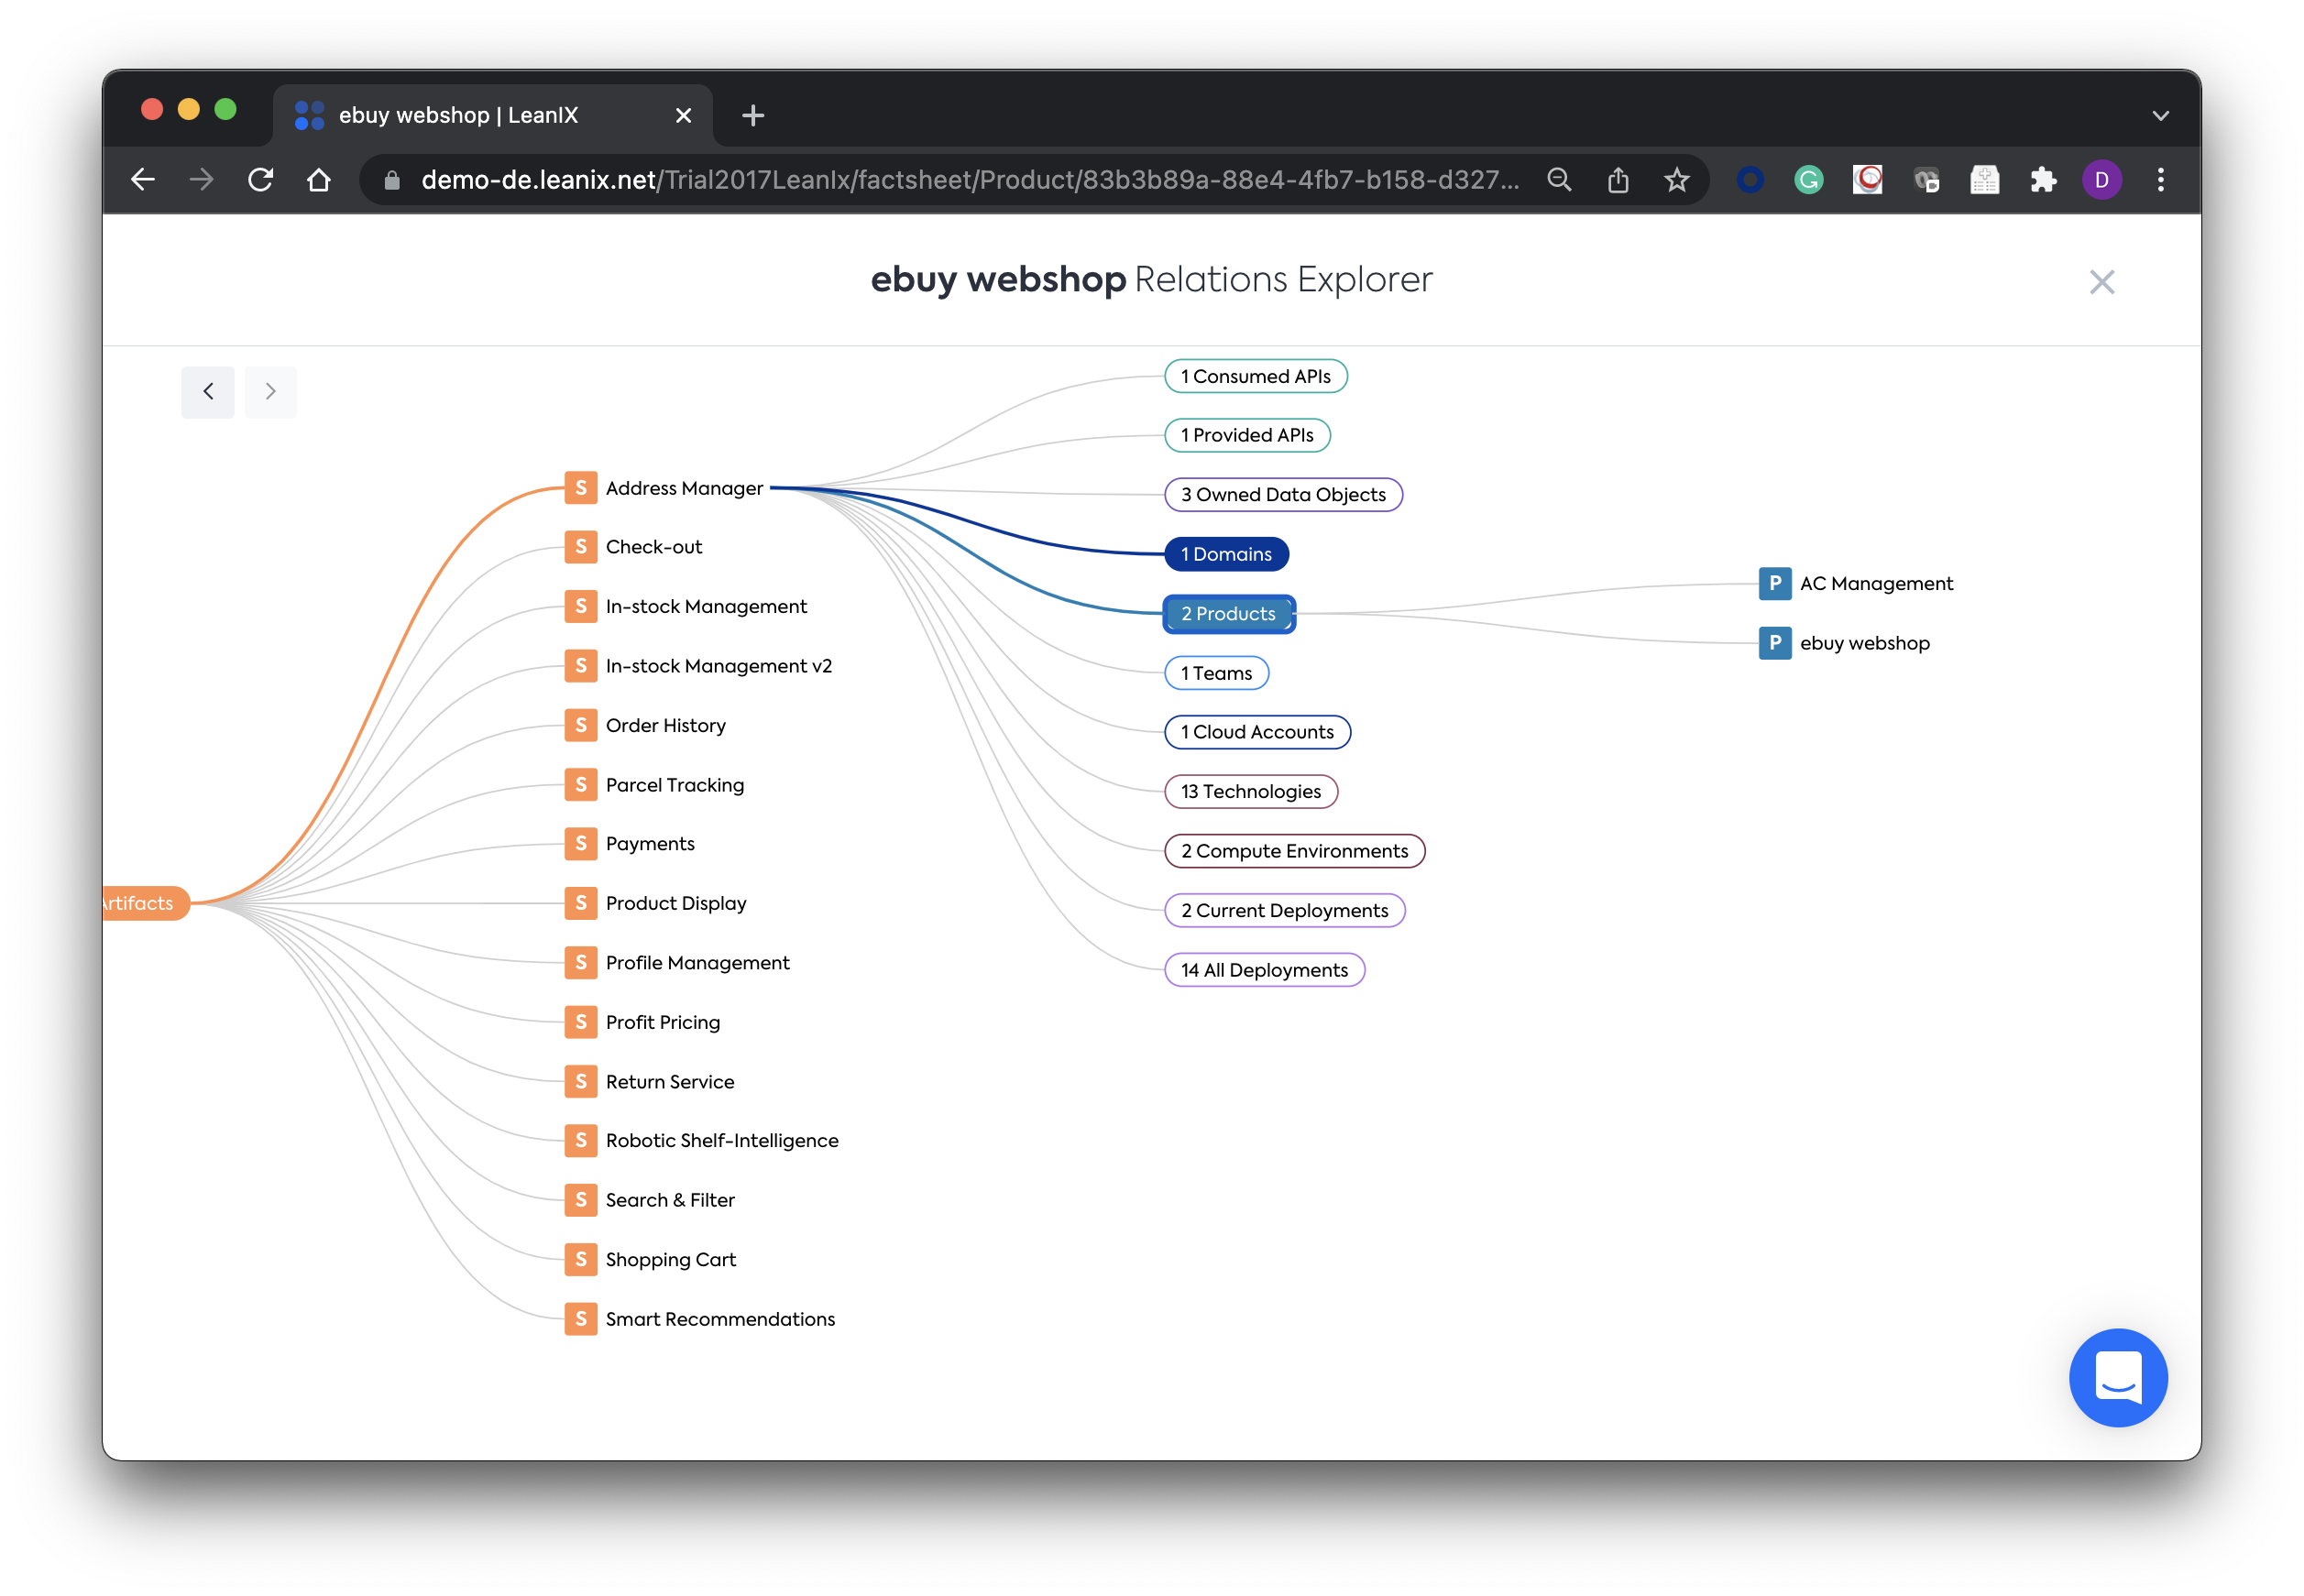 A knowledge graph that enables you to navigate dependencies